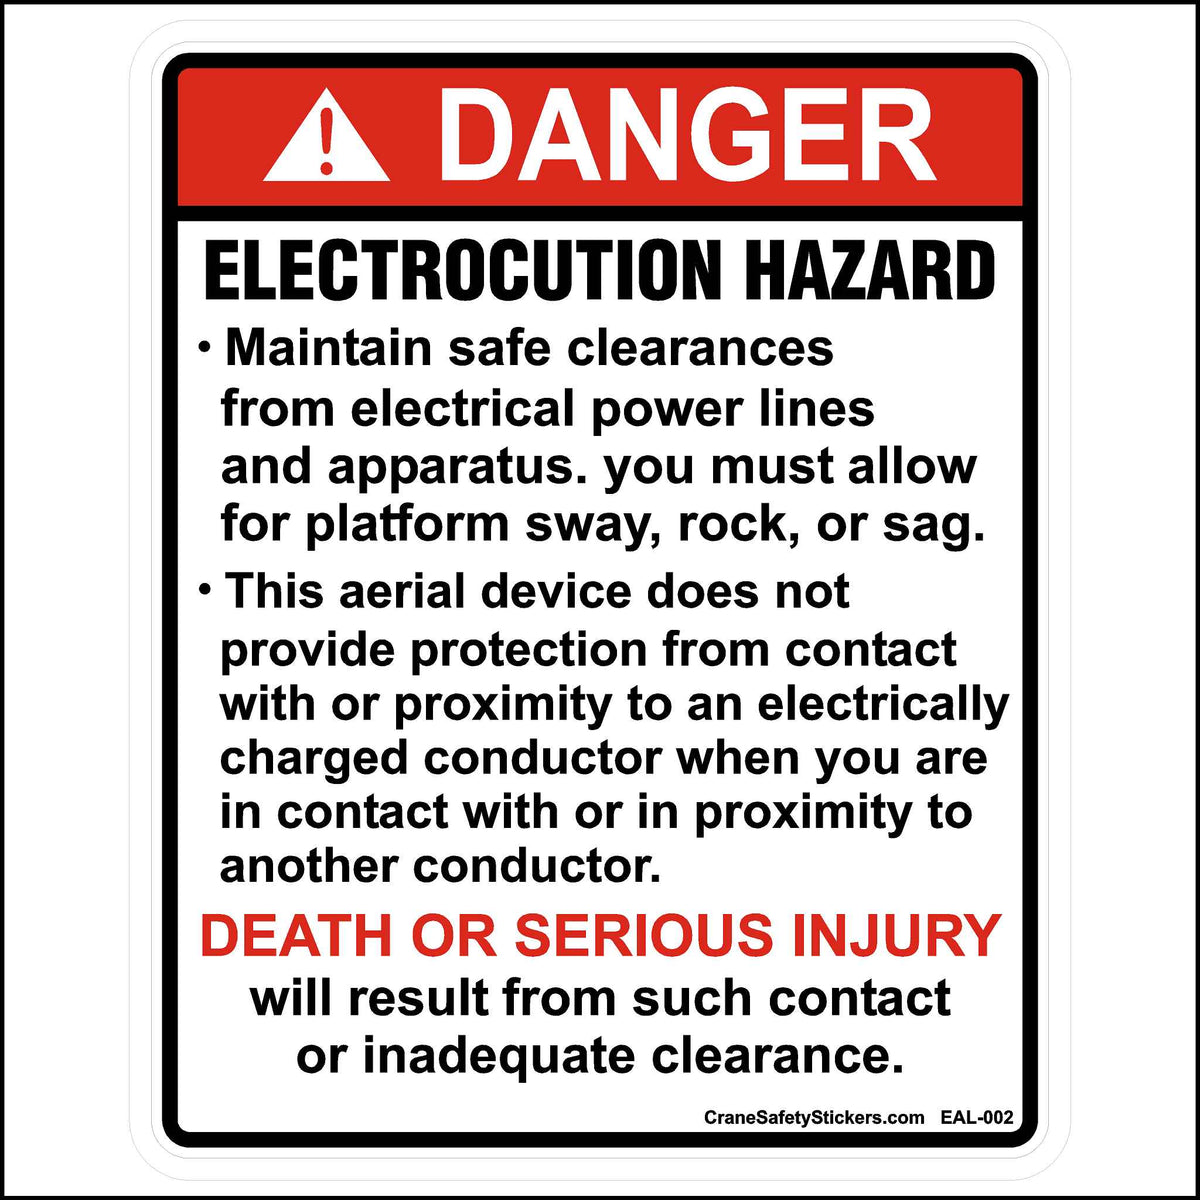 Aerial Lift Safety Sticker Printed with.  DANGER Electrocution Hazard,  • Maintain safe clearances from electrical power lines and apparatus. you must allow for platform sway, rock, or sag.  • This aerial device does not provide protection from contact with or proximity to an electrically charged conductor when you are in contact with or in proximity to another conductor.  DEATH OR SERIOUS INJURY will result from such contact or inadequate clearance.